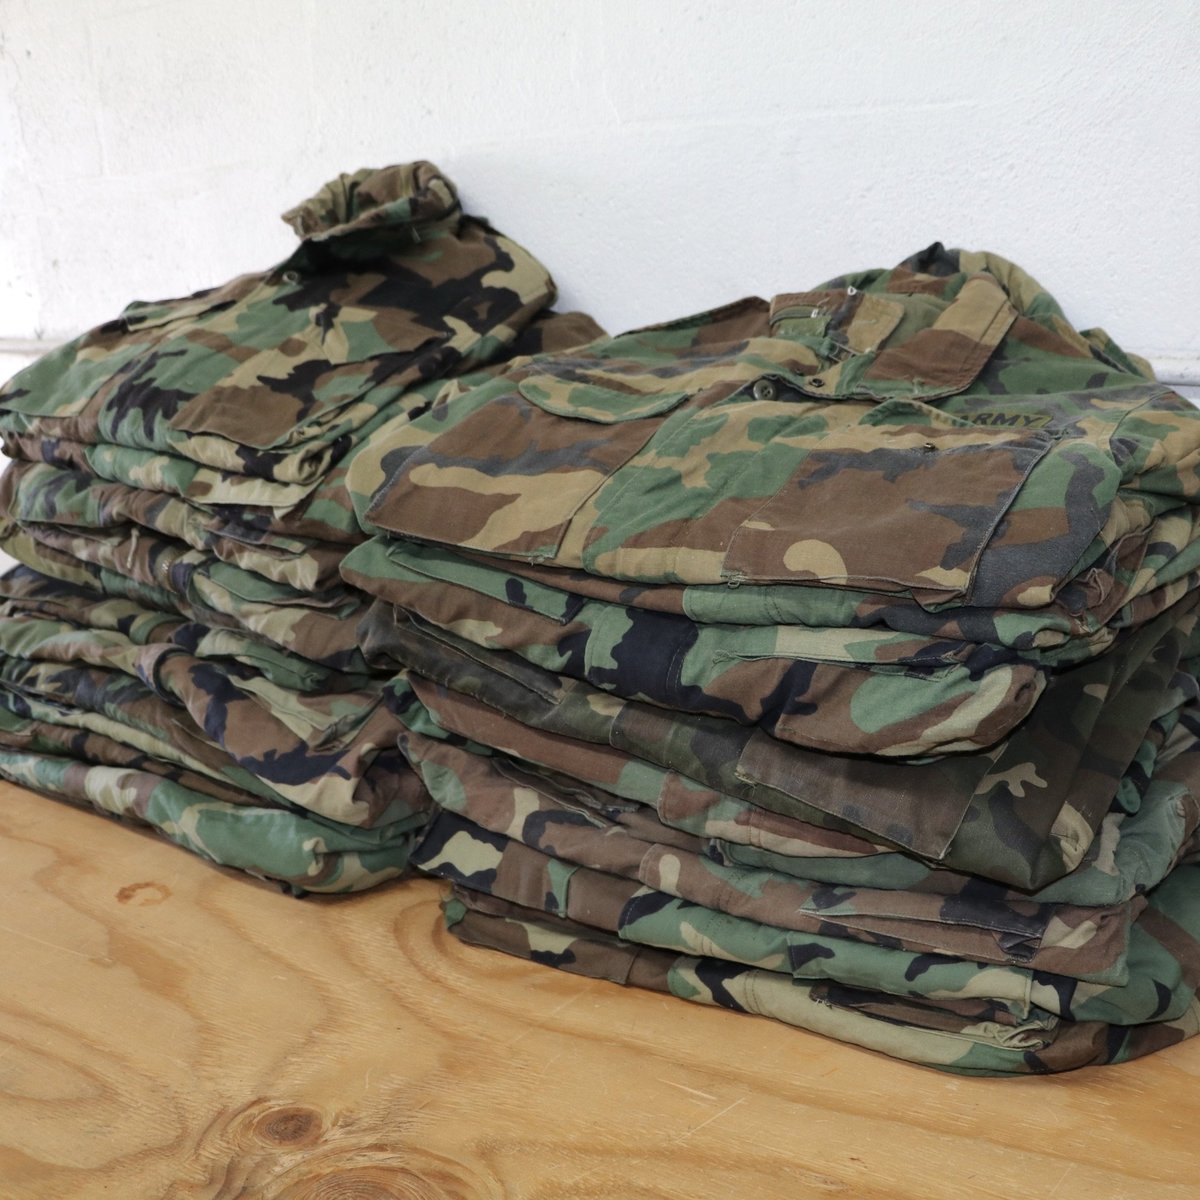 Wholesale military camo clothes - Outfits And Military Accessories 